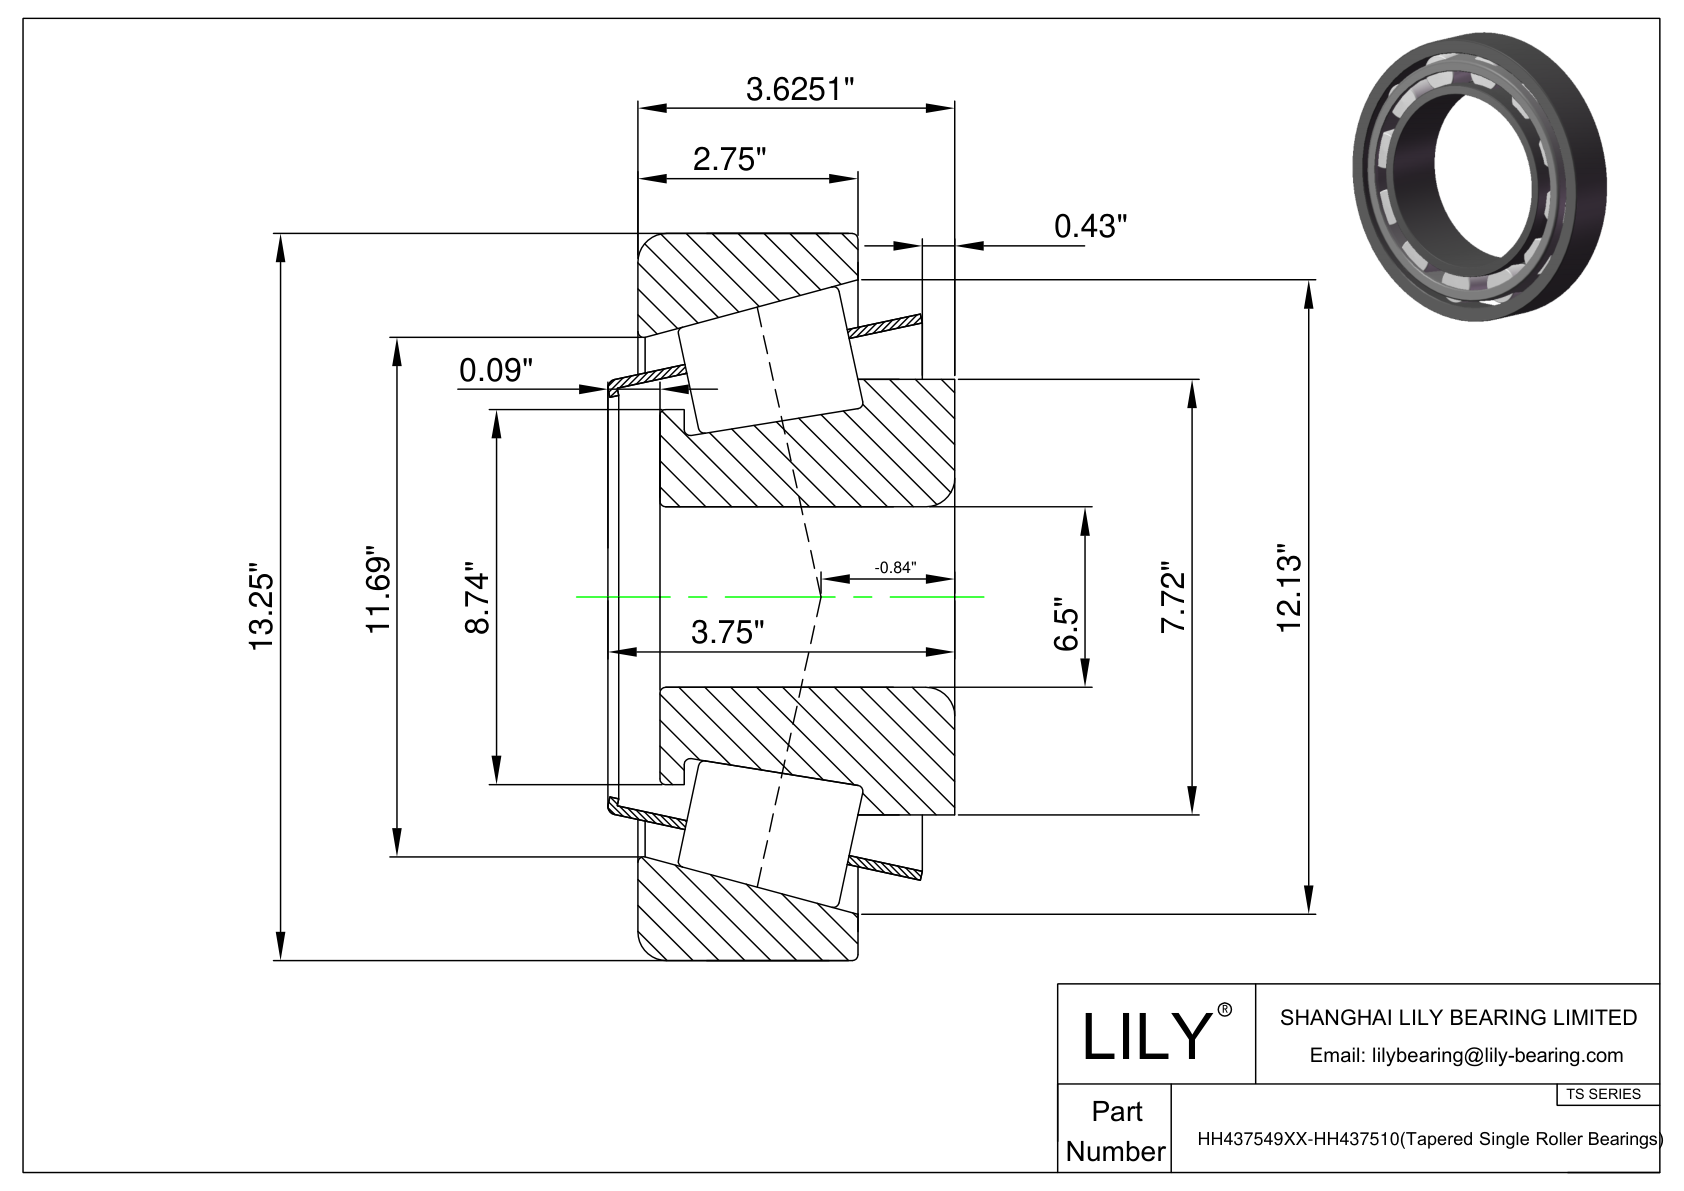 HH437549XX-HH437510 TS (Tapered Single Roller Bearings) (Imperial) cad drawing